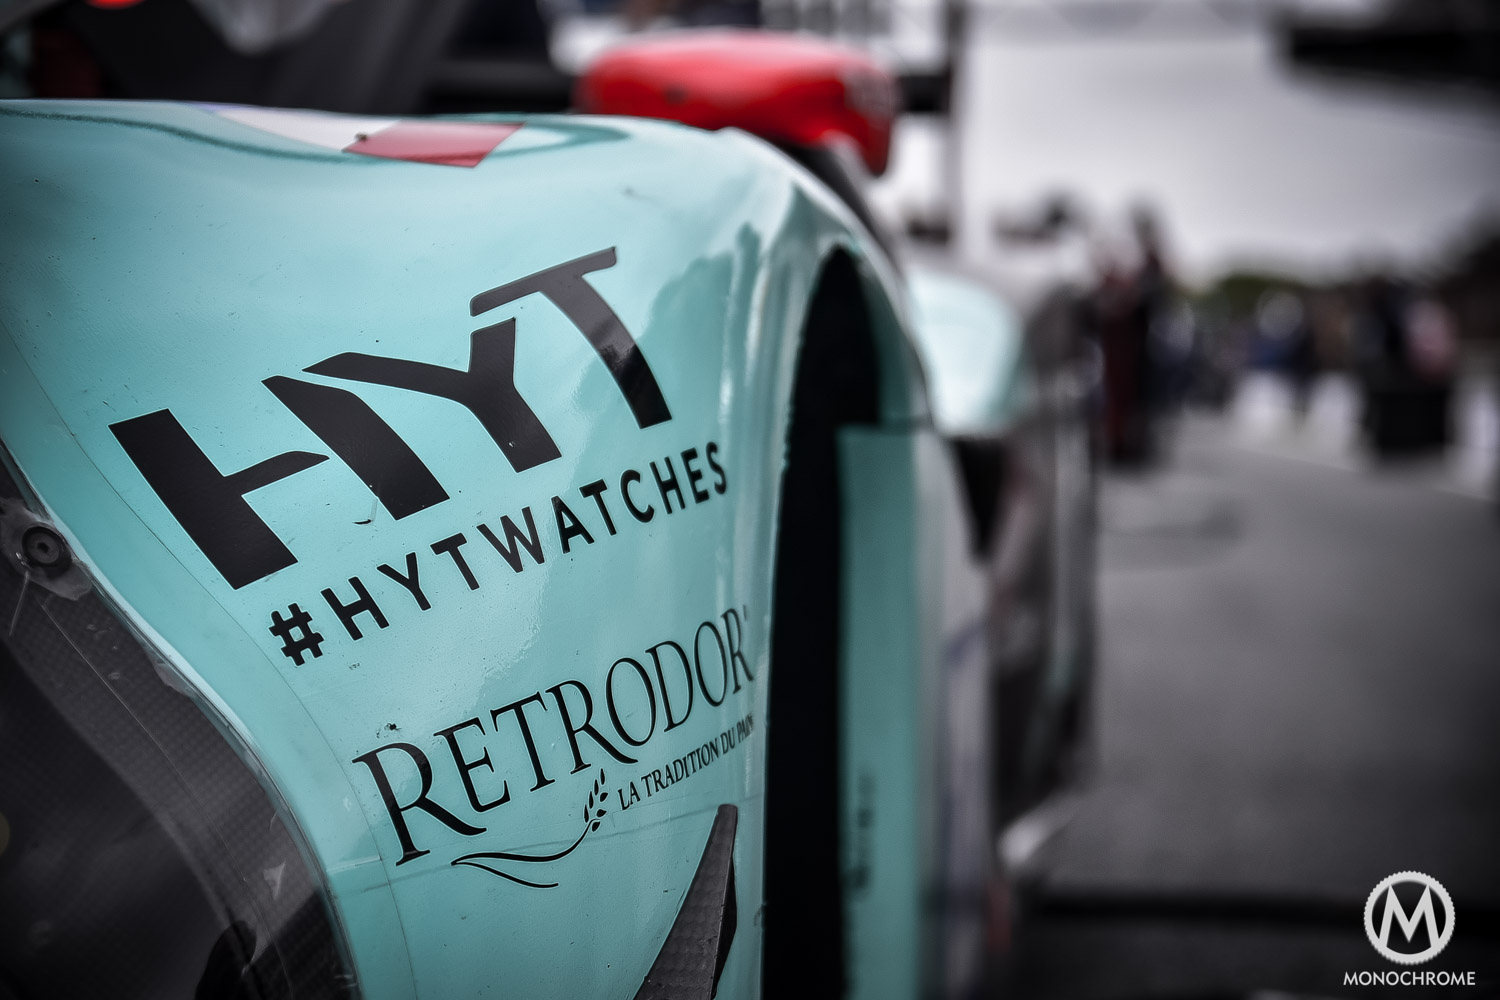 HYT Watches - panis barthez competition - EMLS - Event report